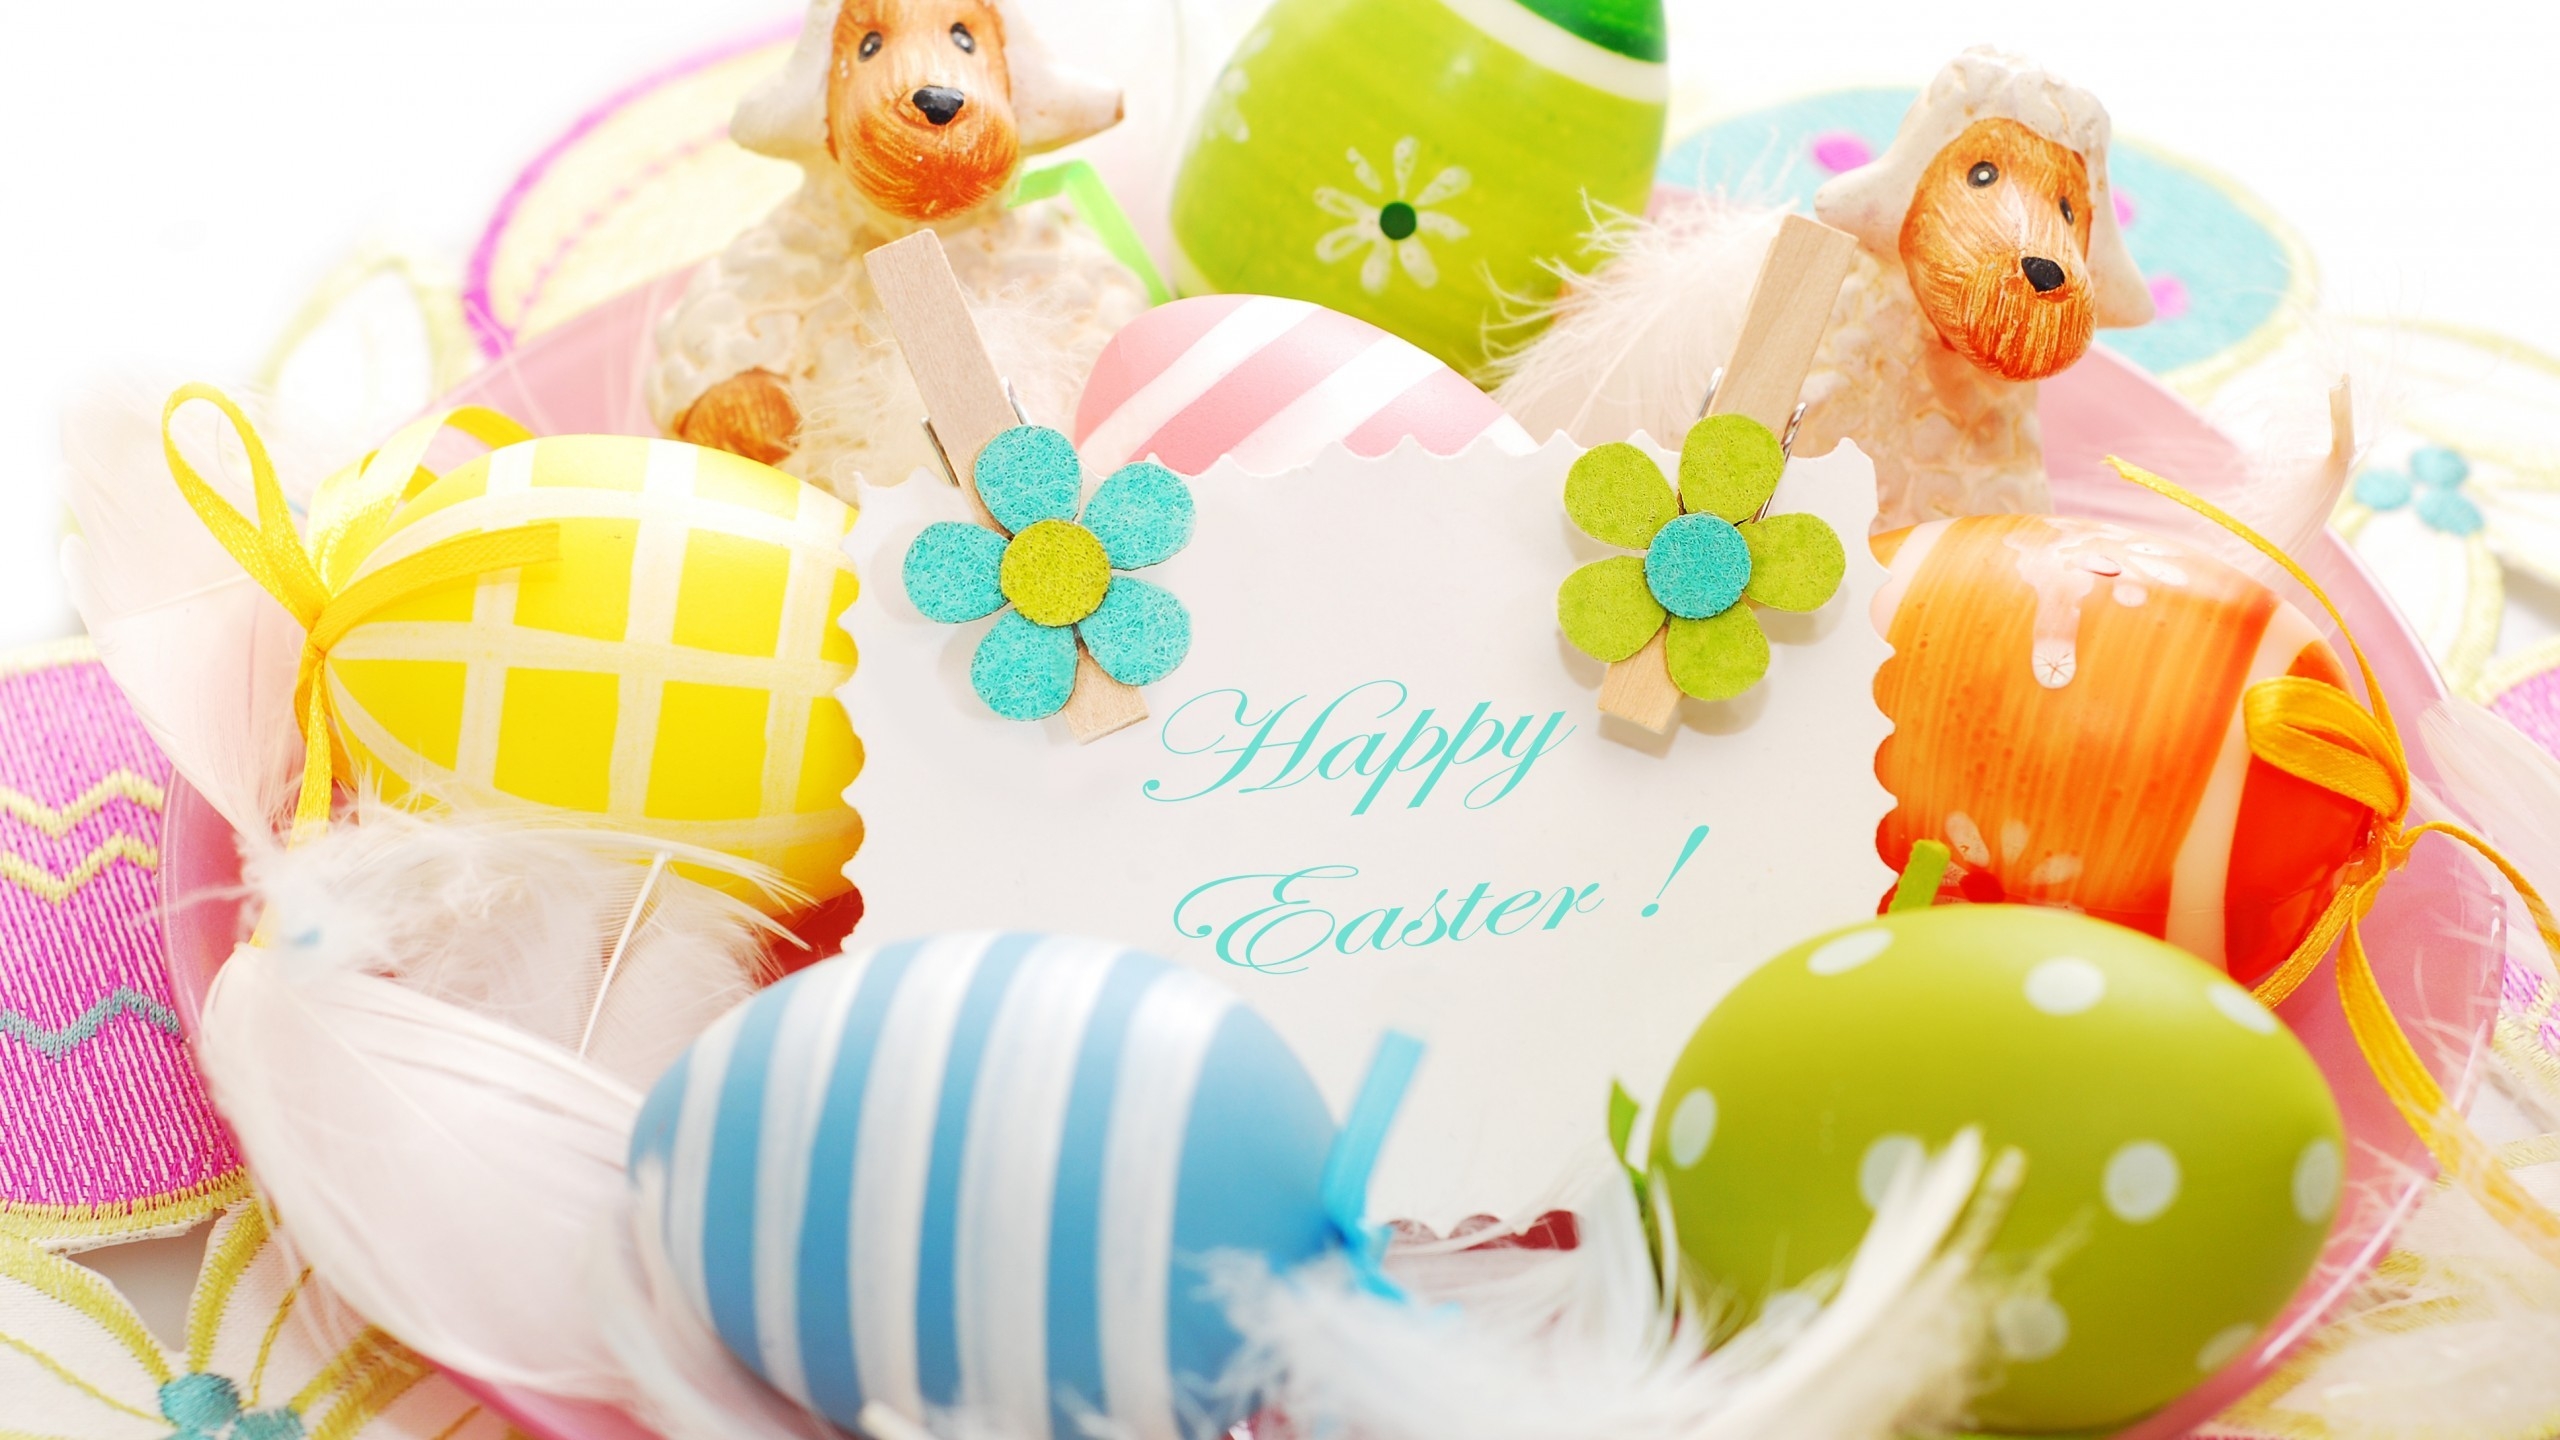 2014 Happy Easter Decorations for 2560x1440 HDTV resolution